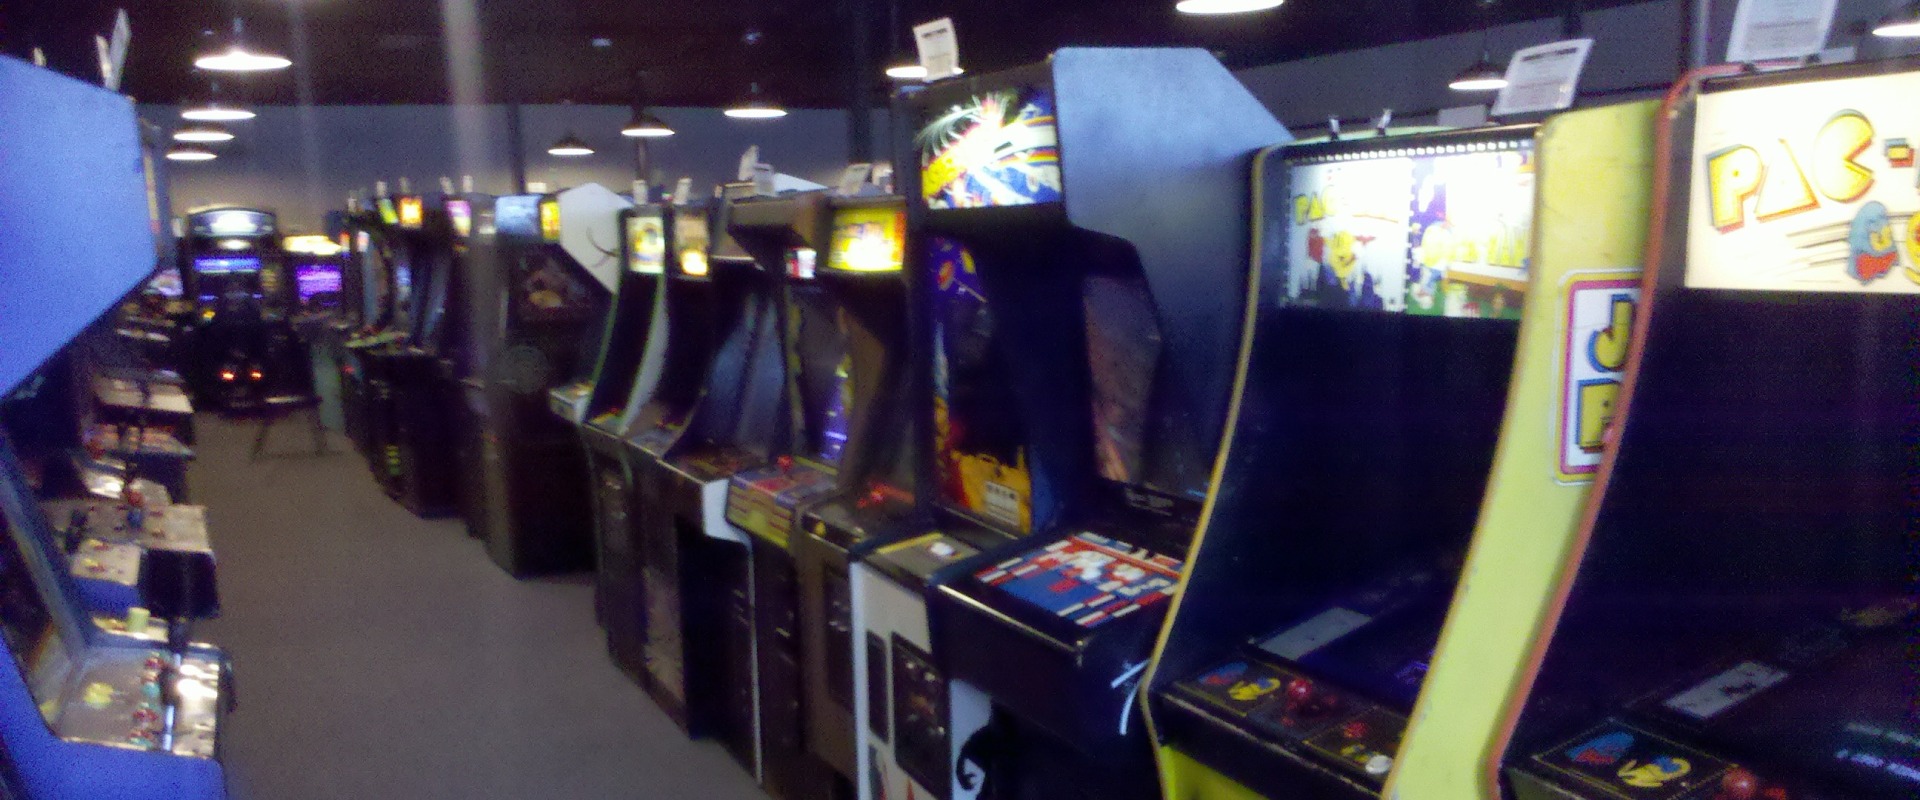 Exploring Galloping Ghost Arcade in Chicago, IL